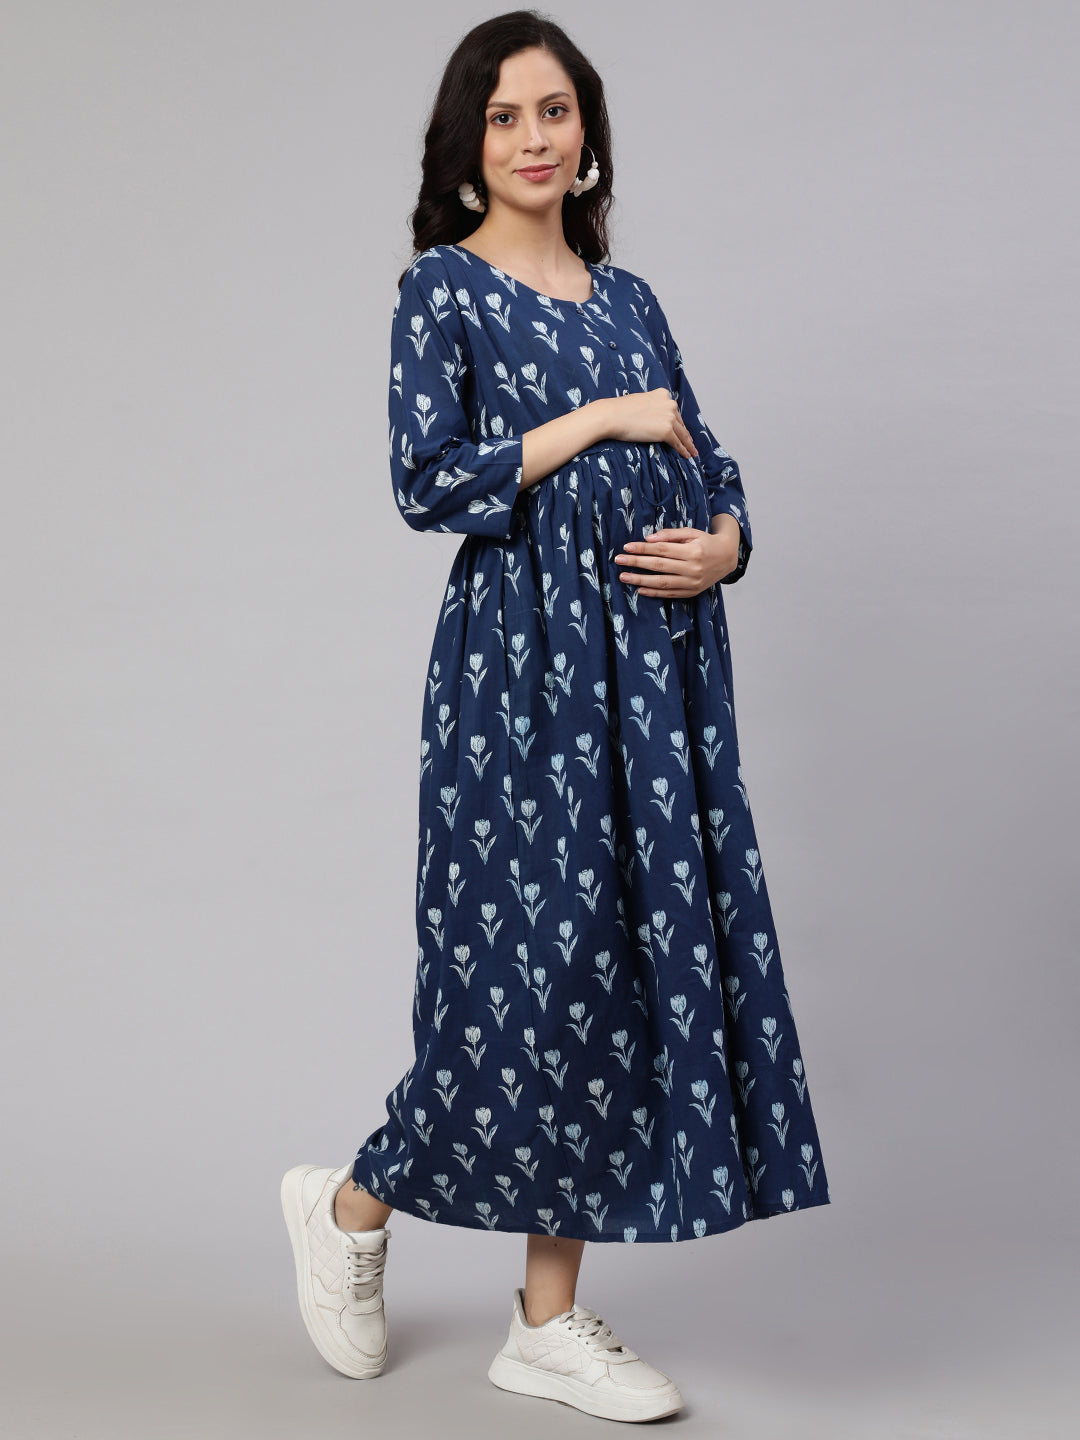 Women's Blue Floral Printed Flared Maternity Dress - Nayo Clothing